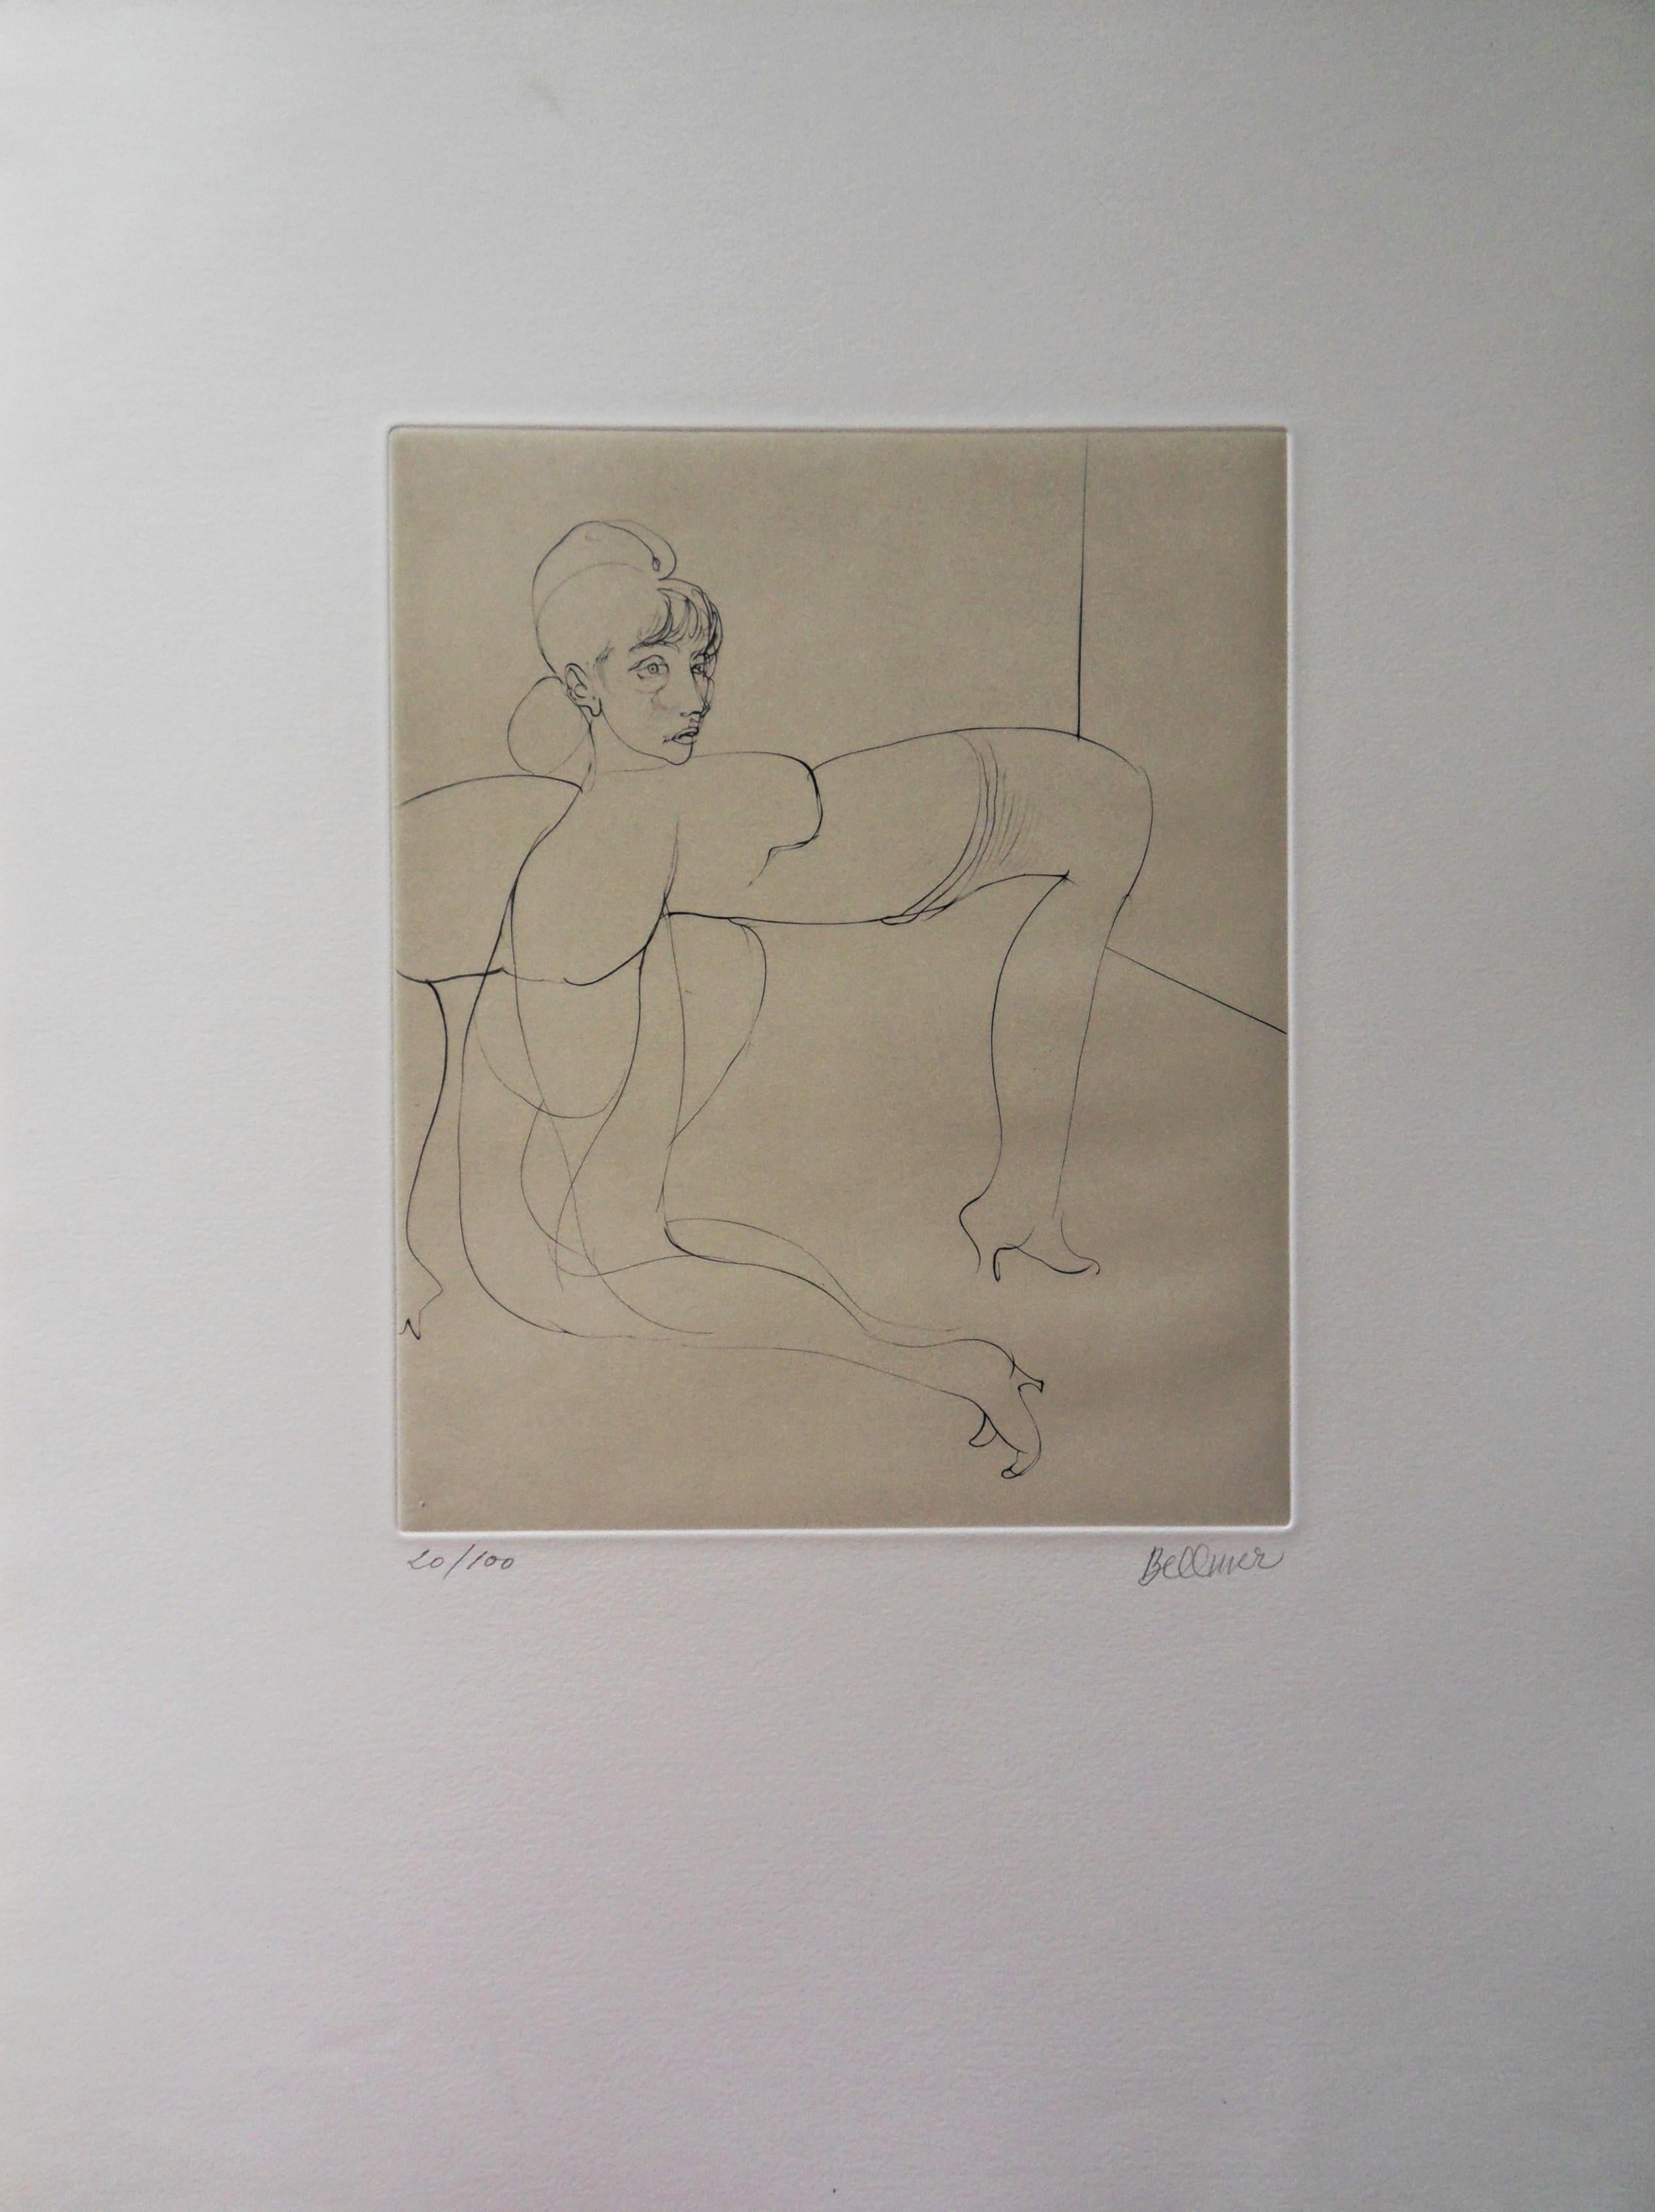 Hans Bellmer Figurative Print - The Octopus Lady - Original Etching Handsigned, Numbered